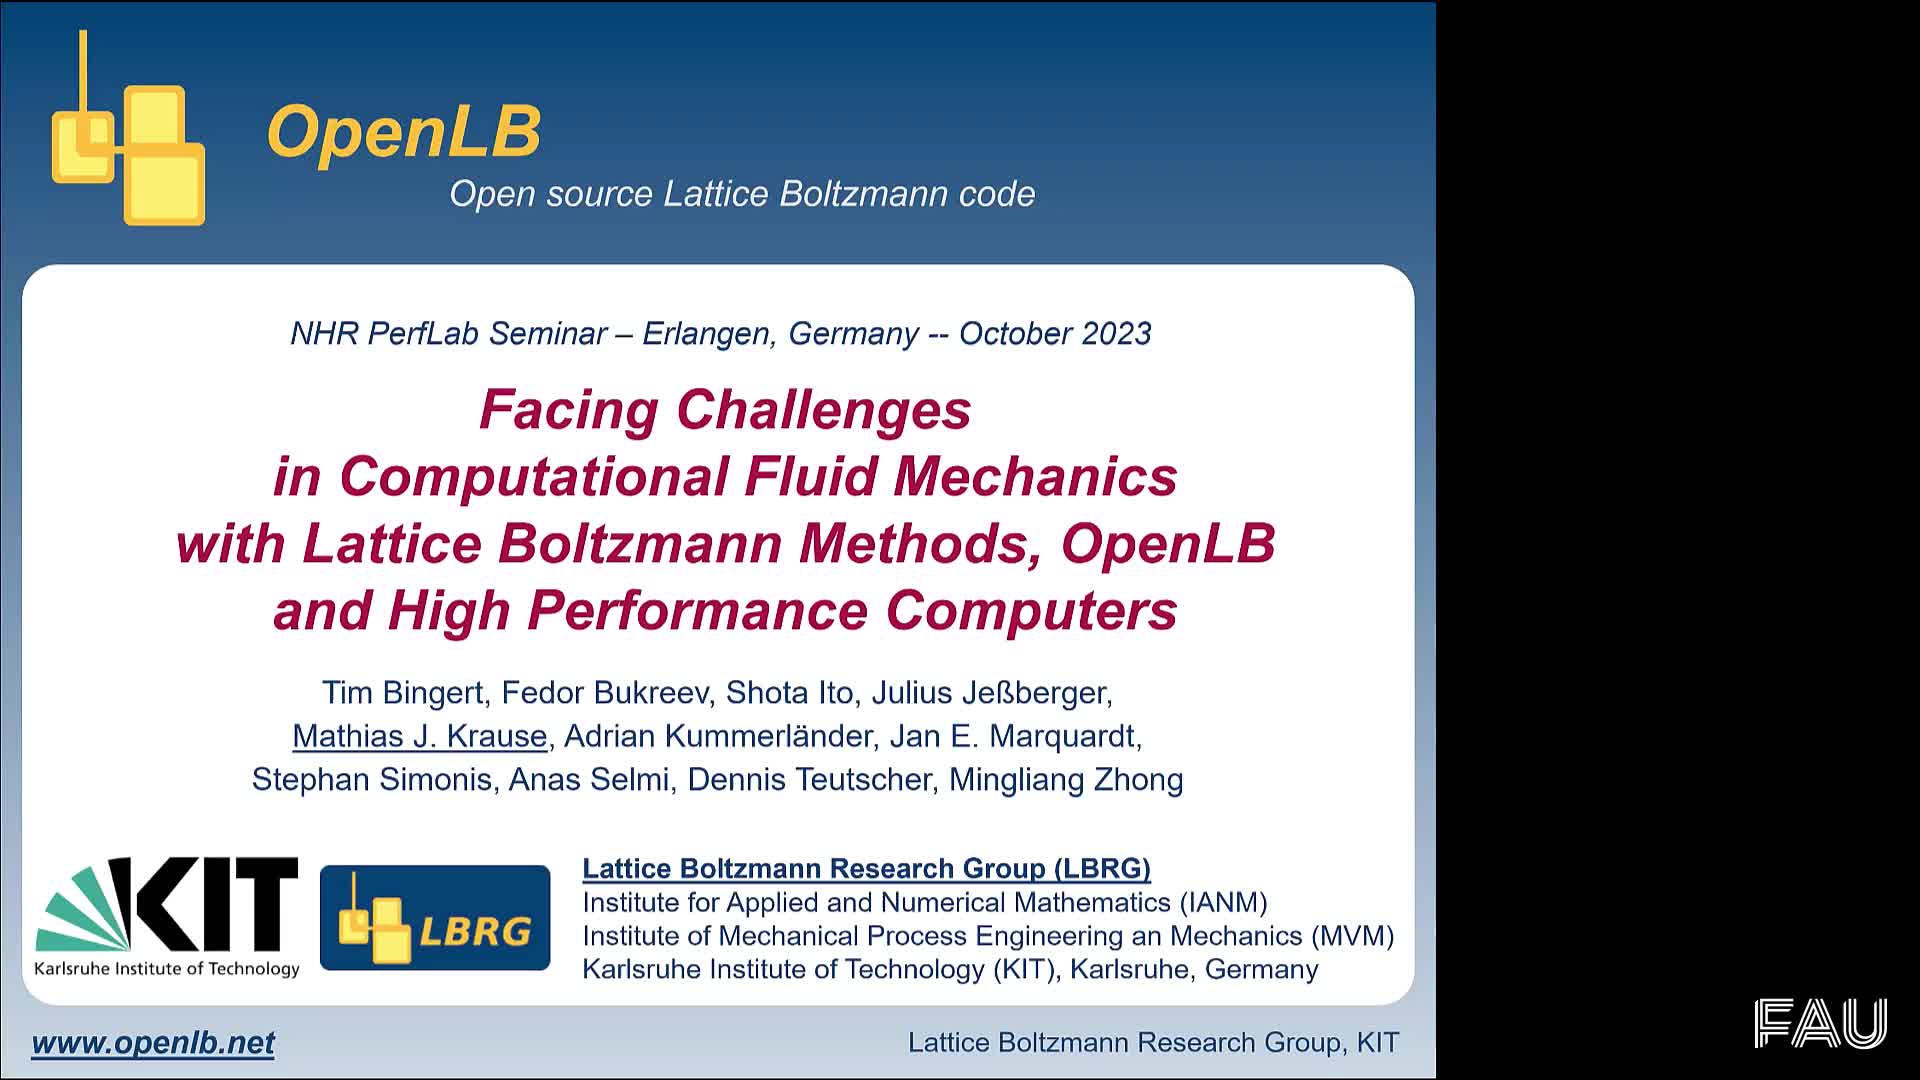 NHR PerfLab Seminar 2023-10-17: Facing Challenges in Computational Fluid Mechanics with Lattice Boltzmann Methods, OpenLB and High Performance Computers preview image